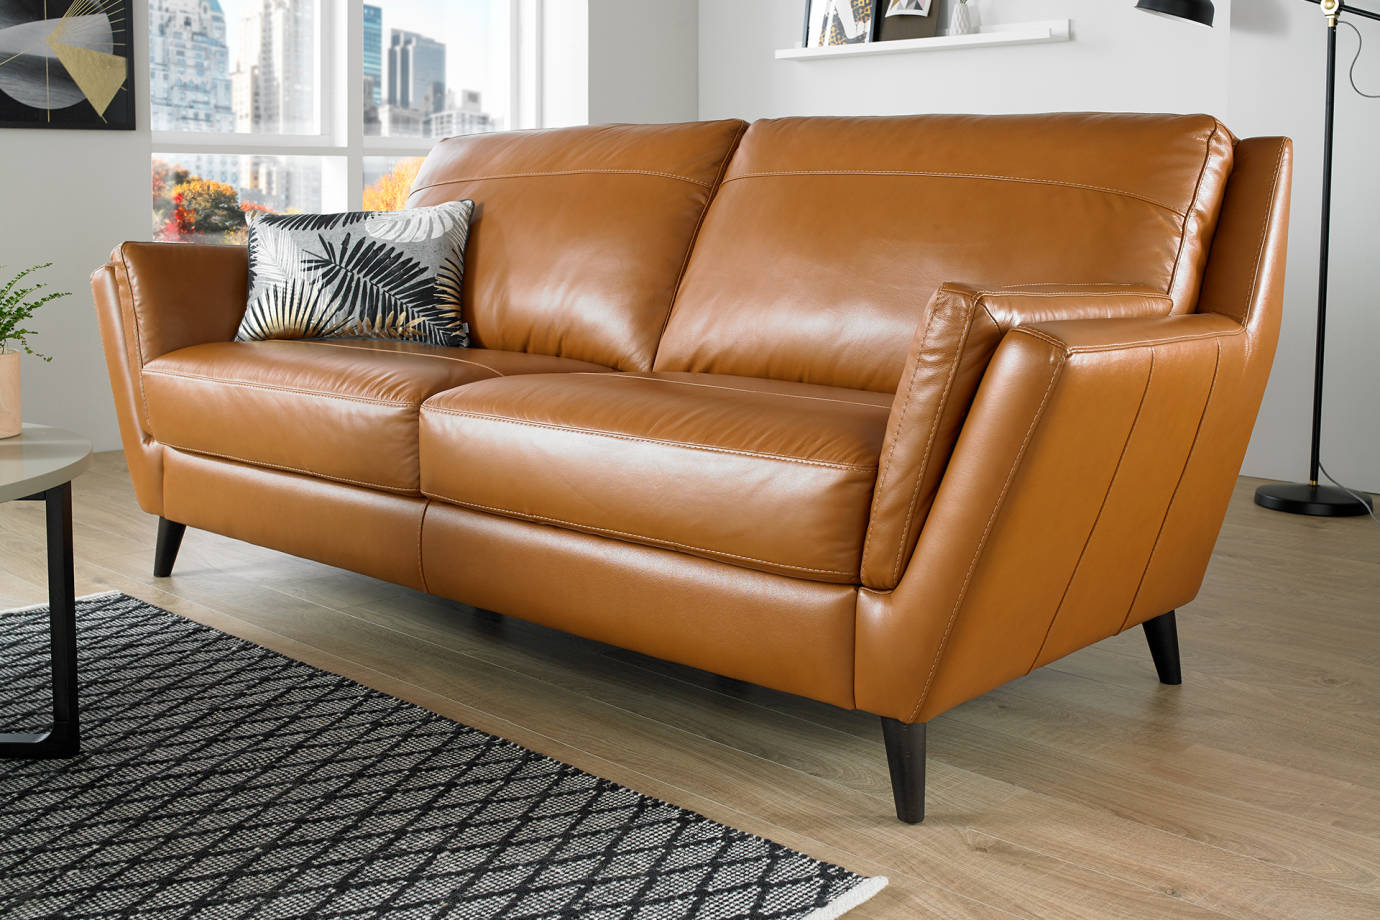 Leather Sofas Sofology, Light Tan Leather Sofa And Loveseat